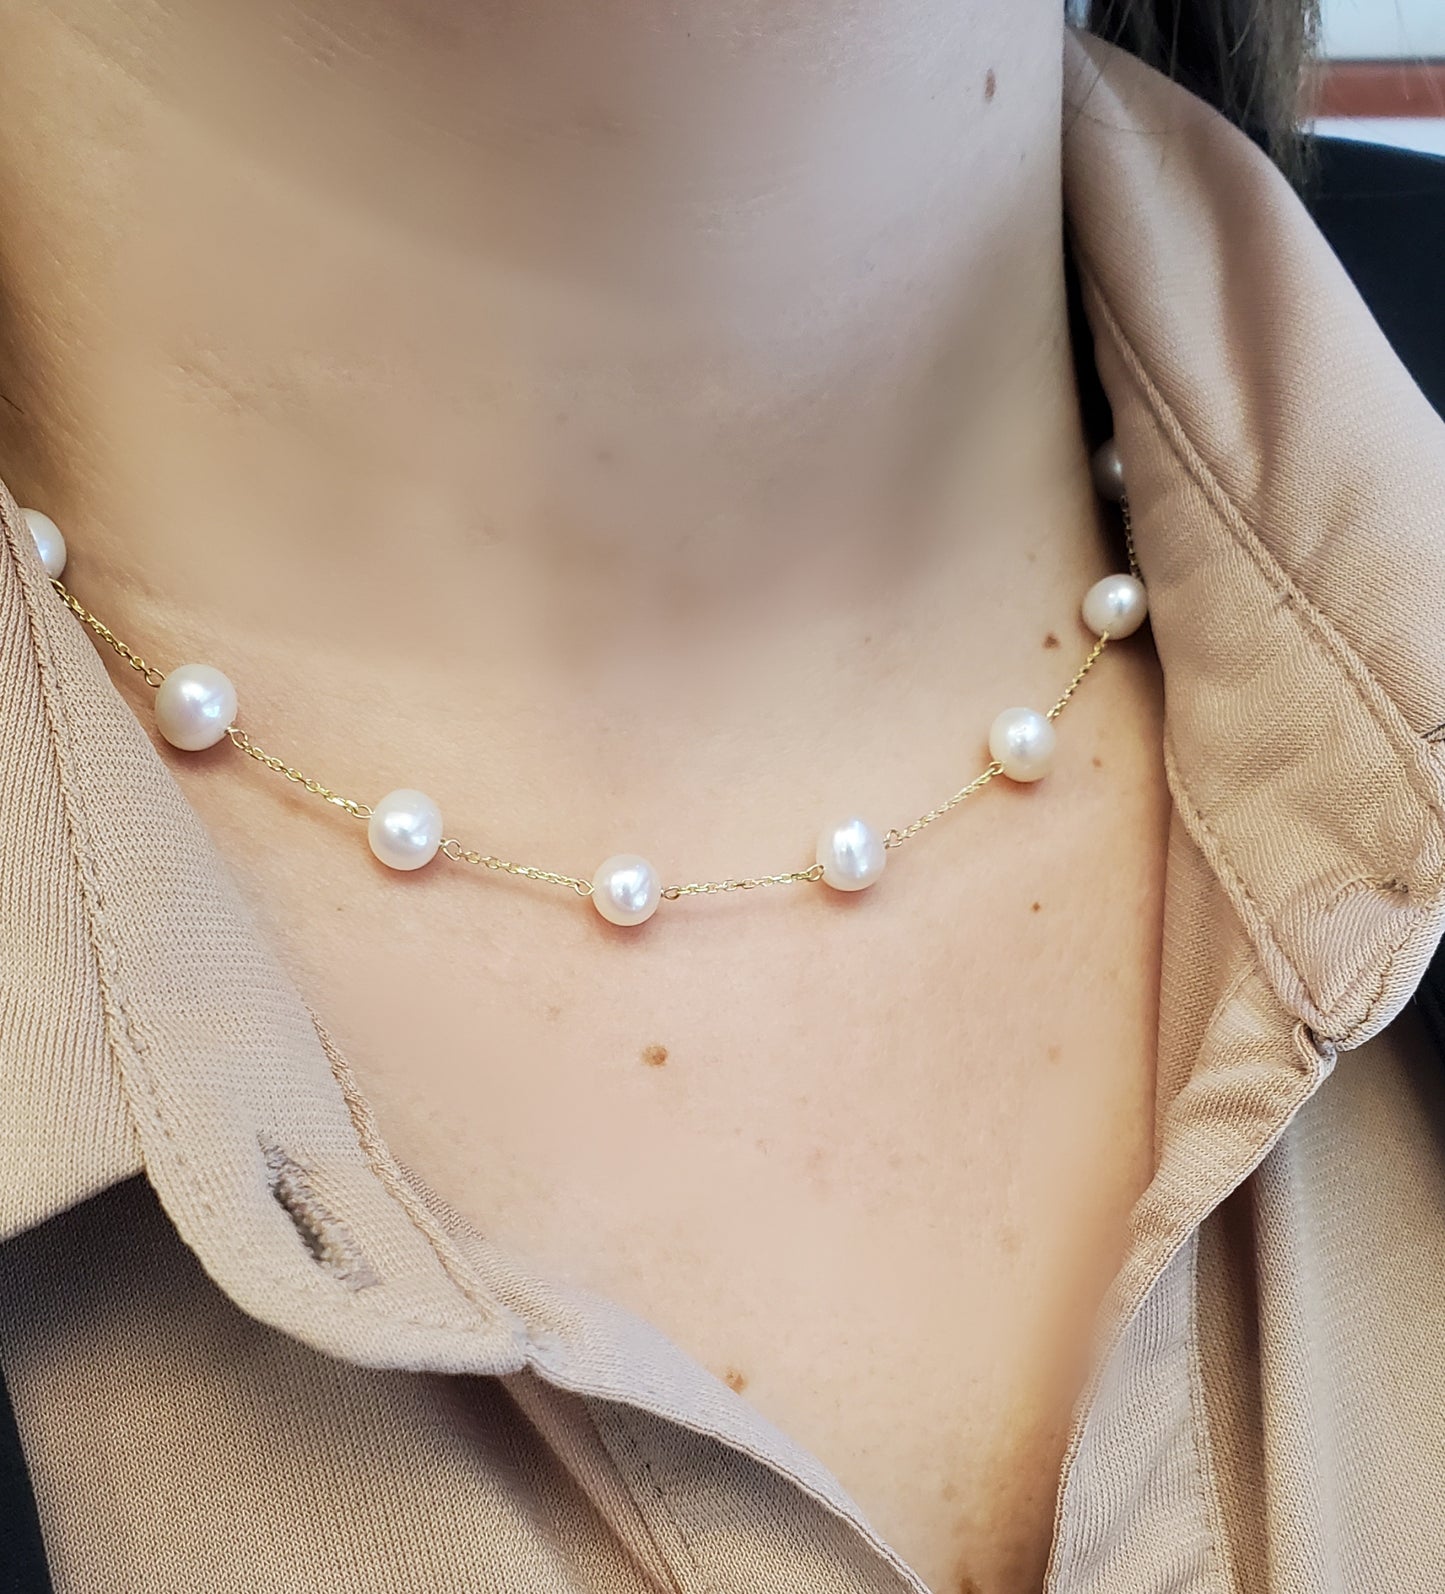 Freshwater Pearl Necklace 0.5" Spacing